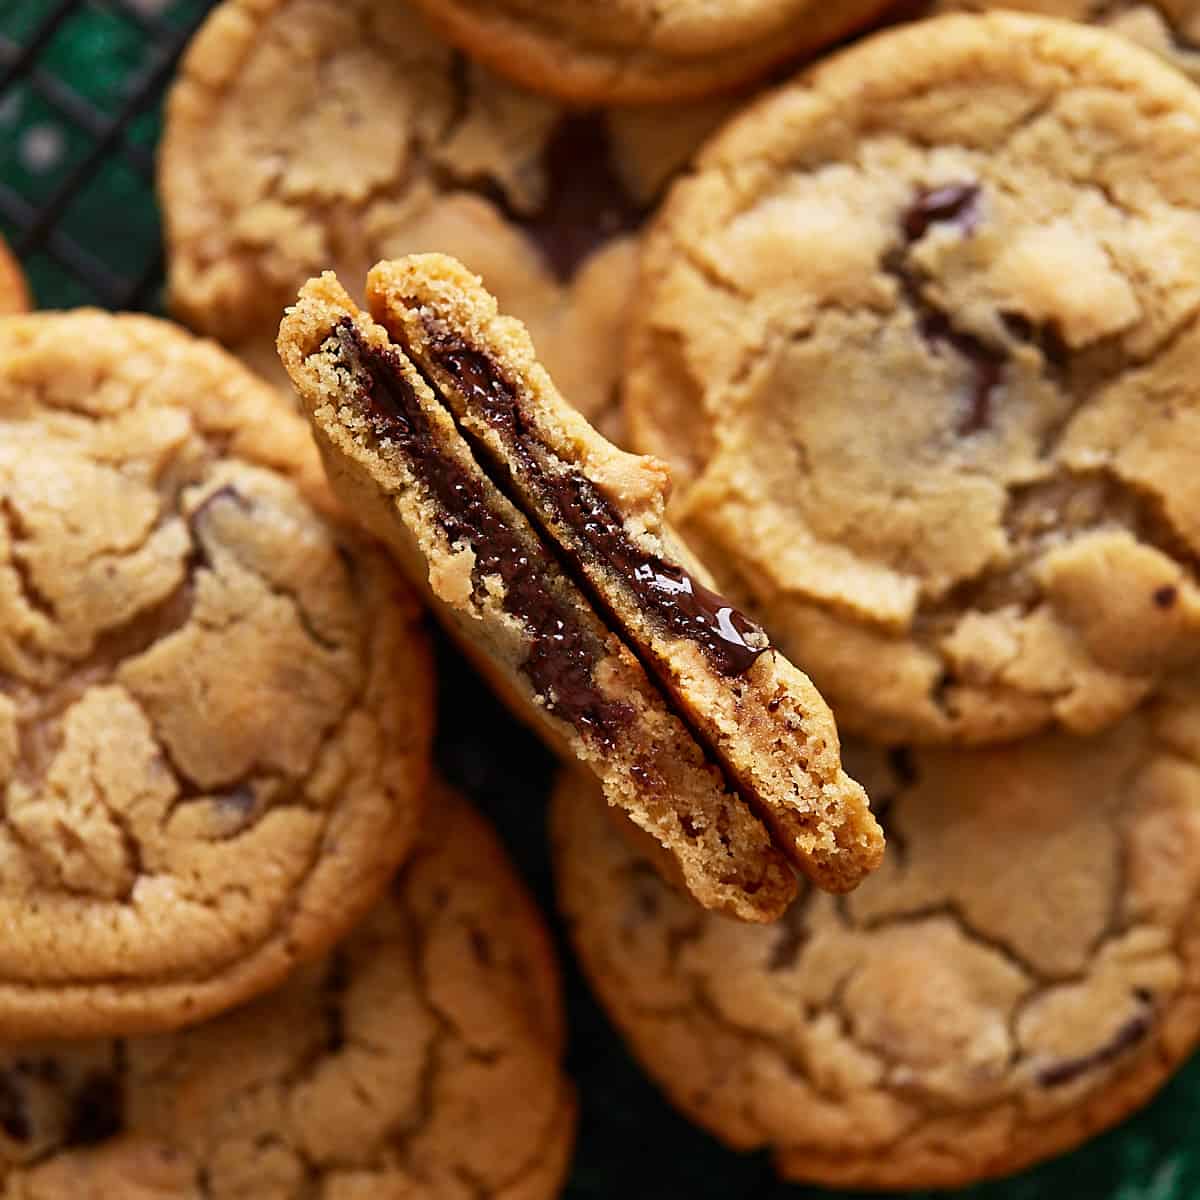 A cookie broken in half surrounded by other cookies